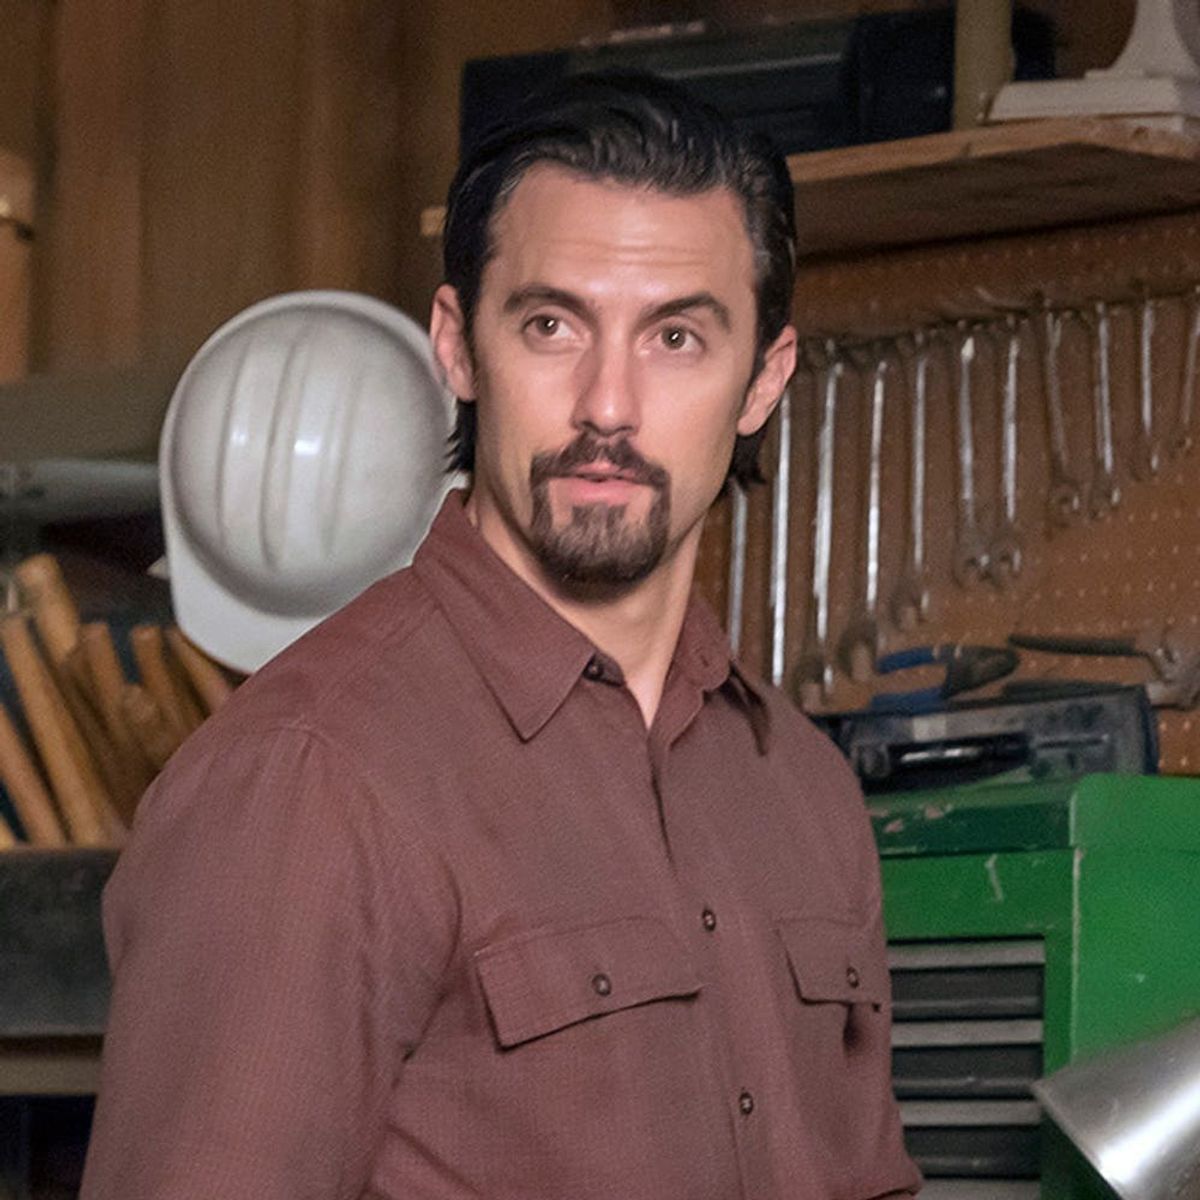 ‘This Is Us’ Recap: ‘Clooney’ Provides Another Ominous Clue About Jack’s Death